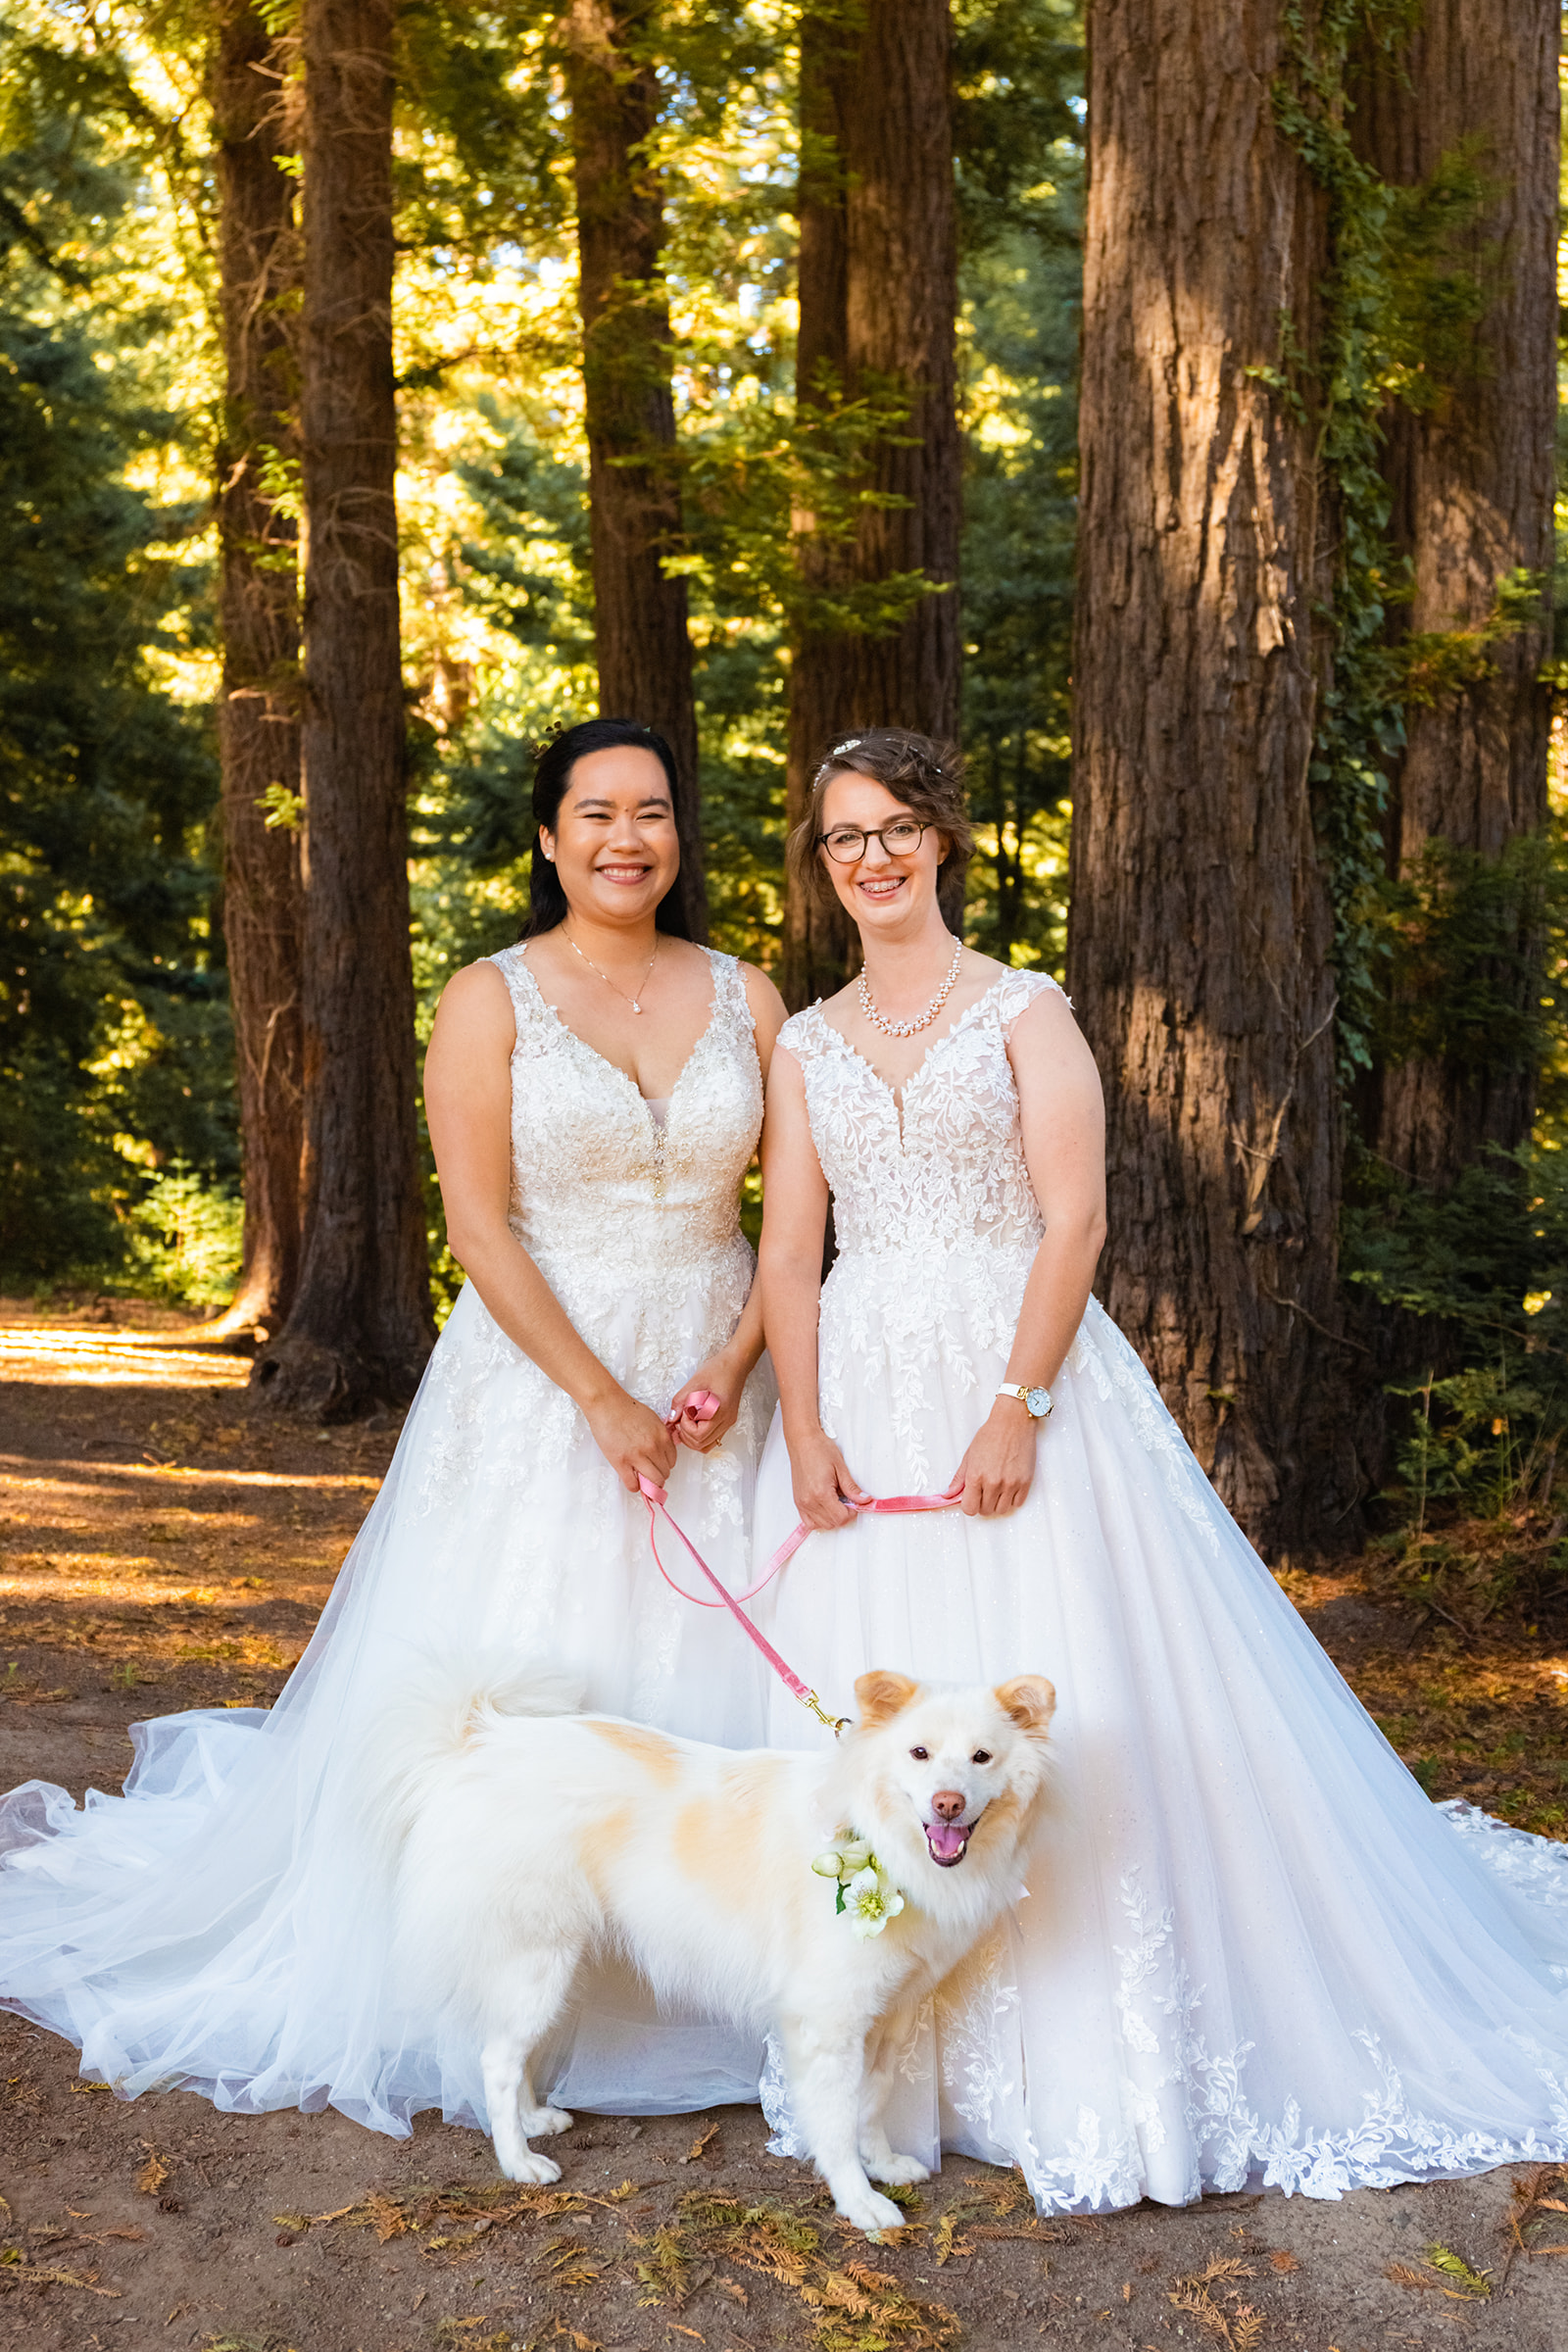 Two brides in wedding dresses with their dog of honor